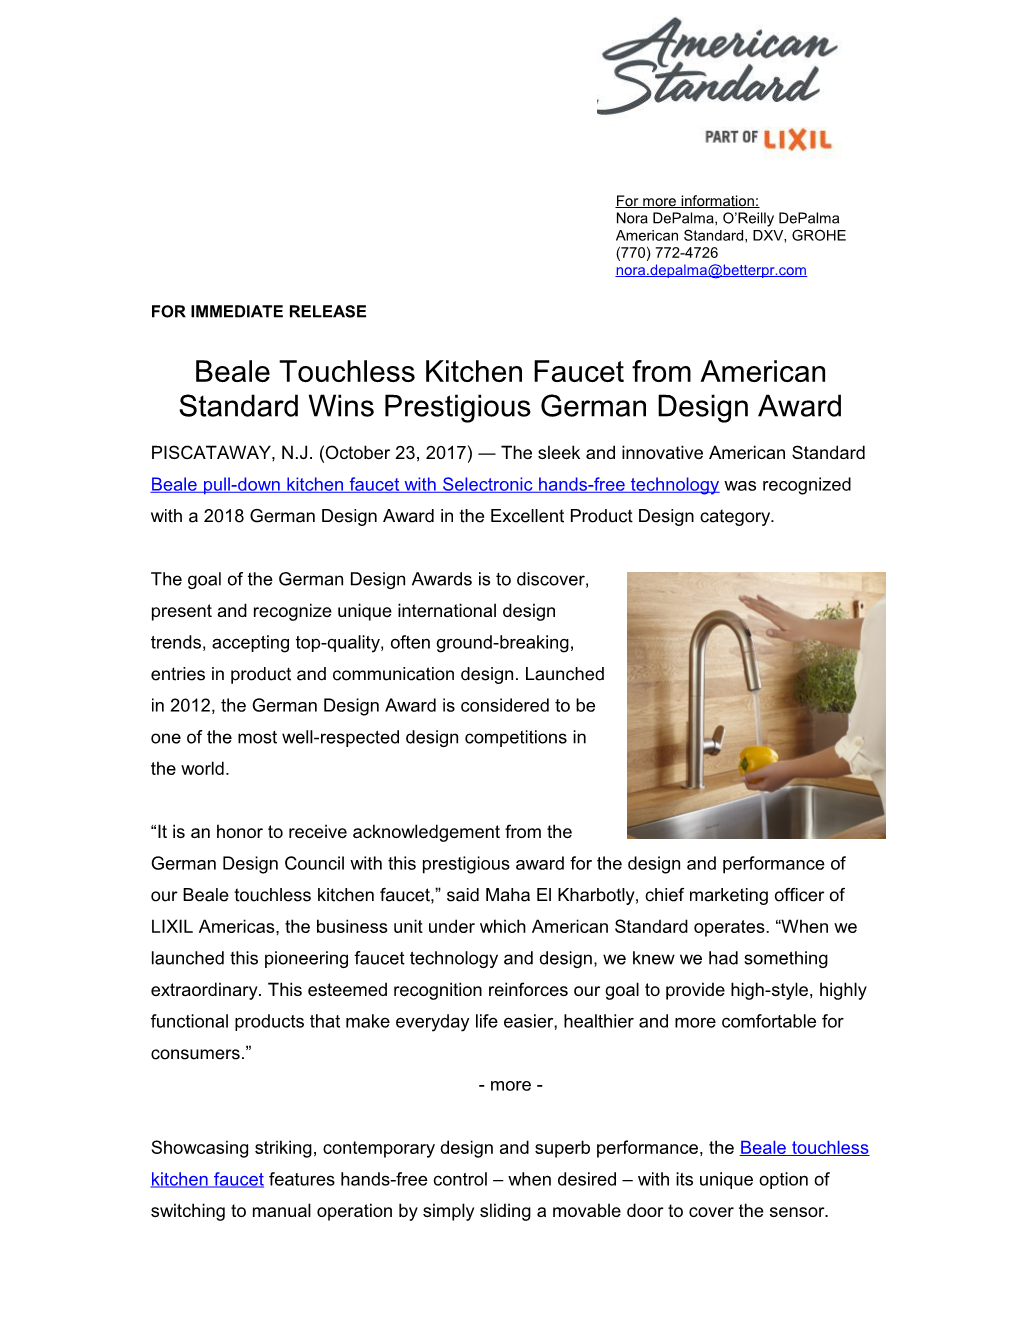 Beale Touchless Faucet from American Standard Wins 2018 German Design Award 3-3-3